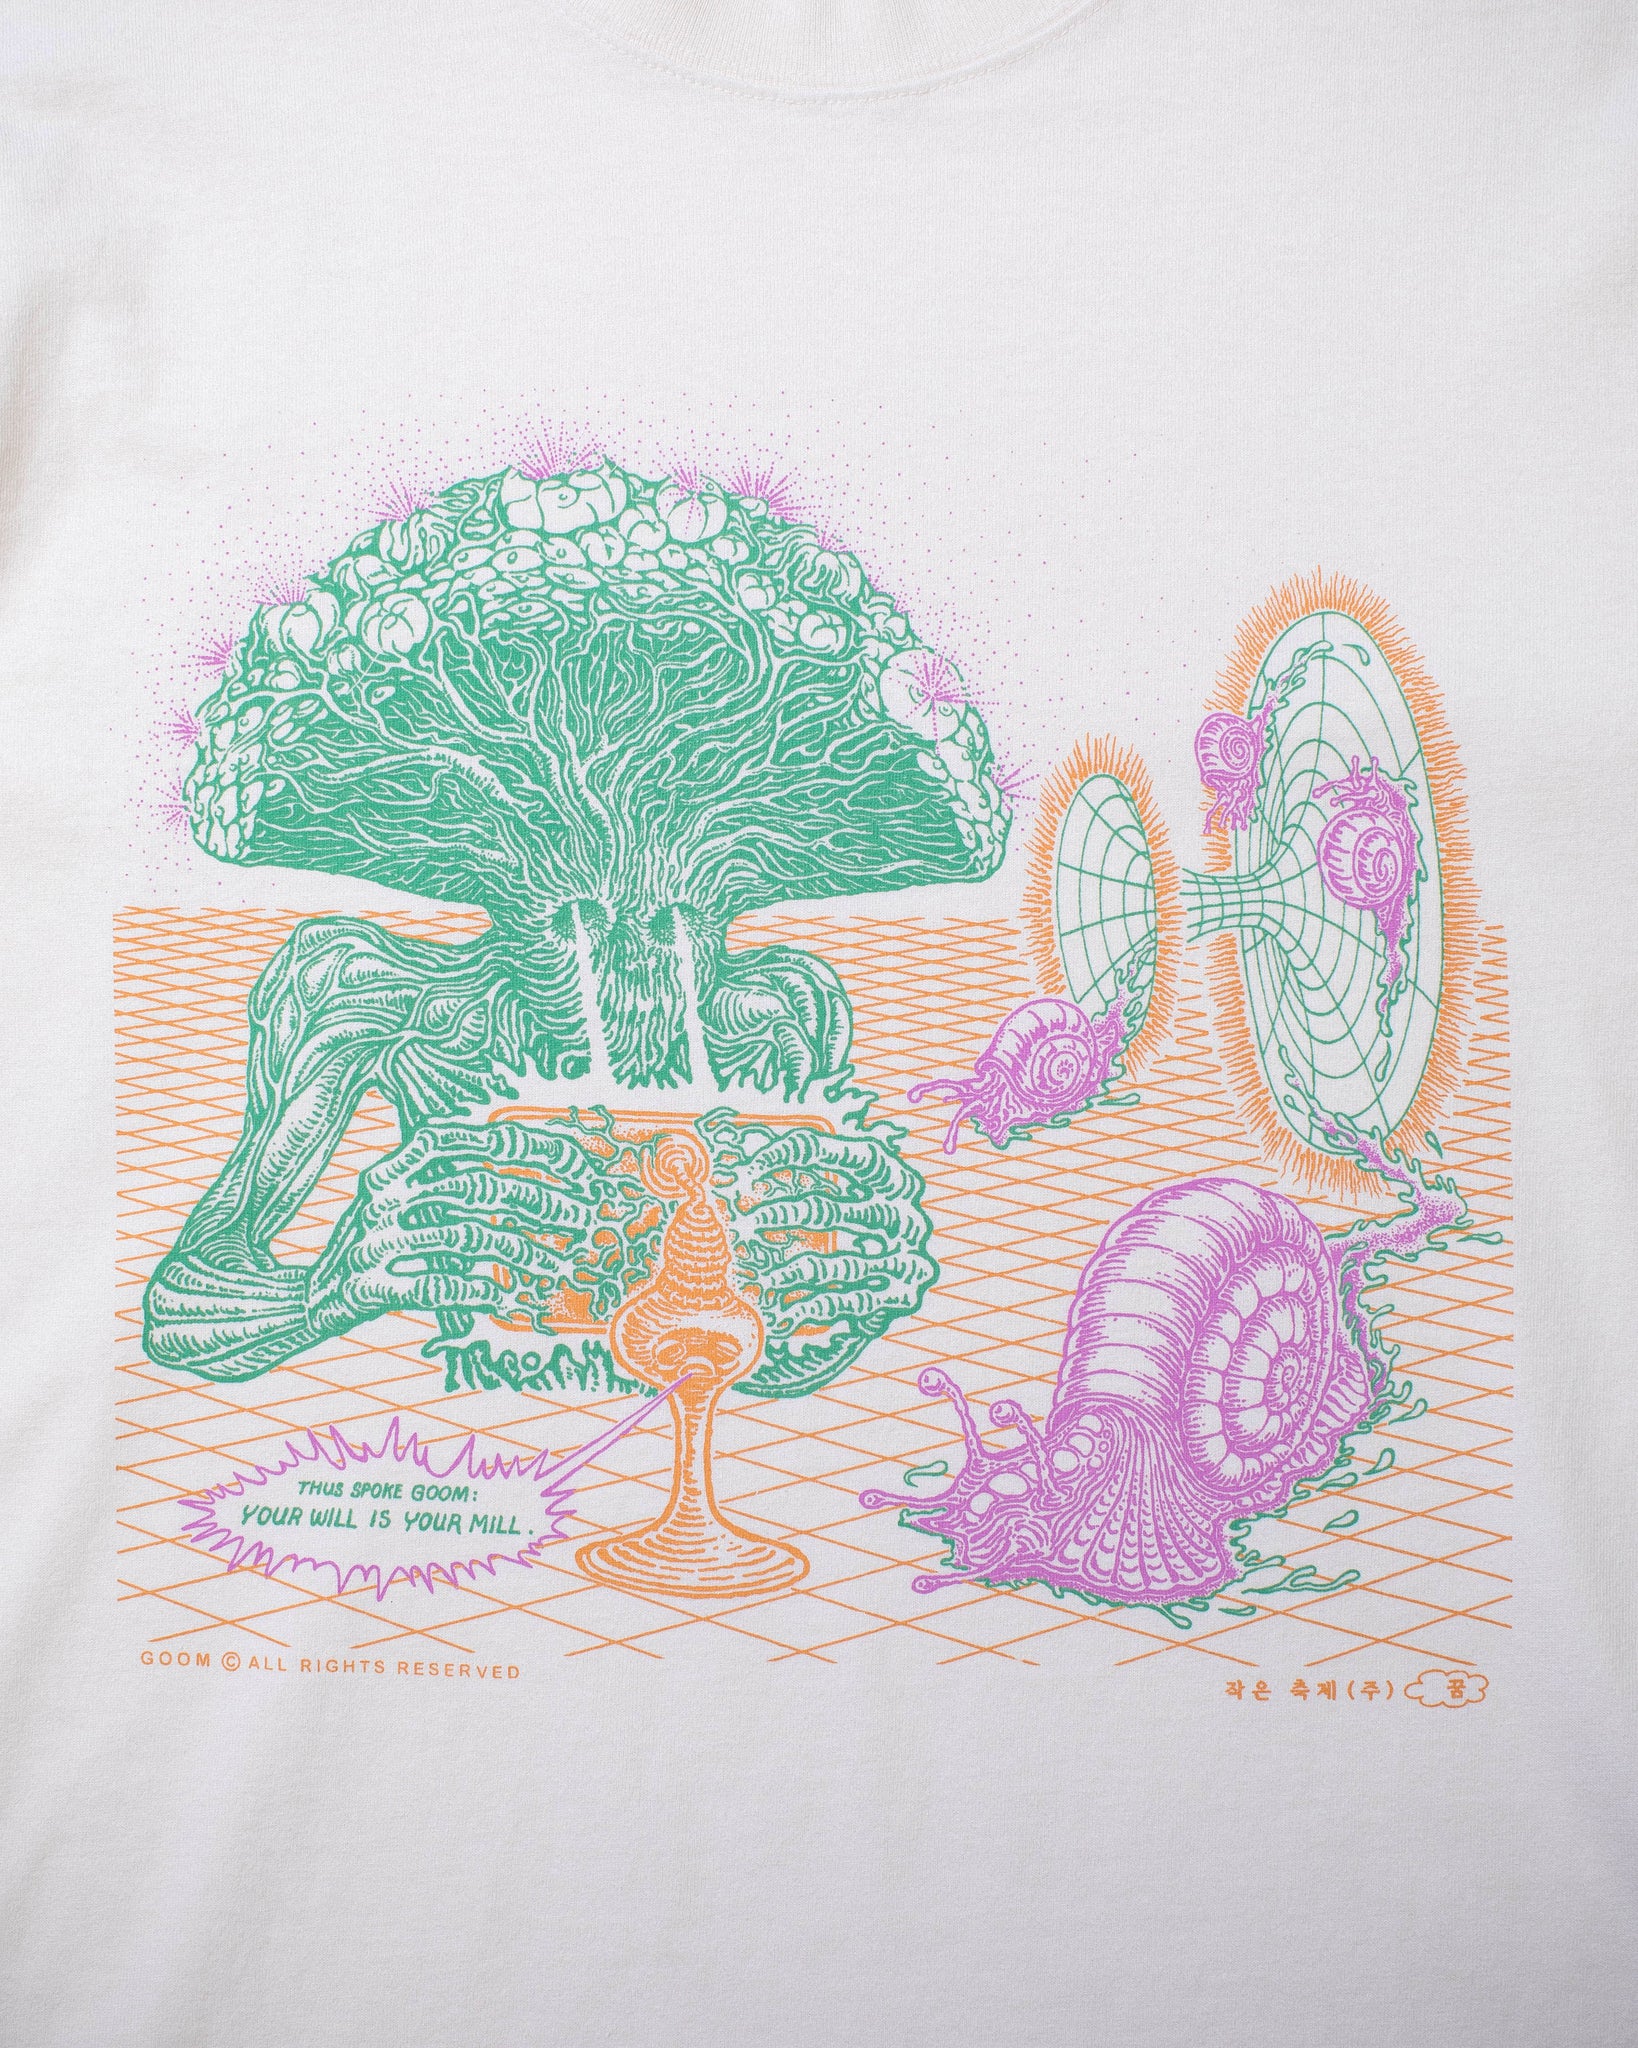 Fungi Connection LS Tee - Off White